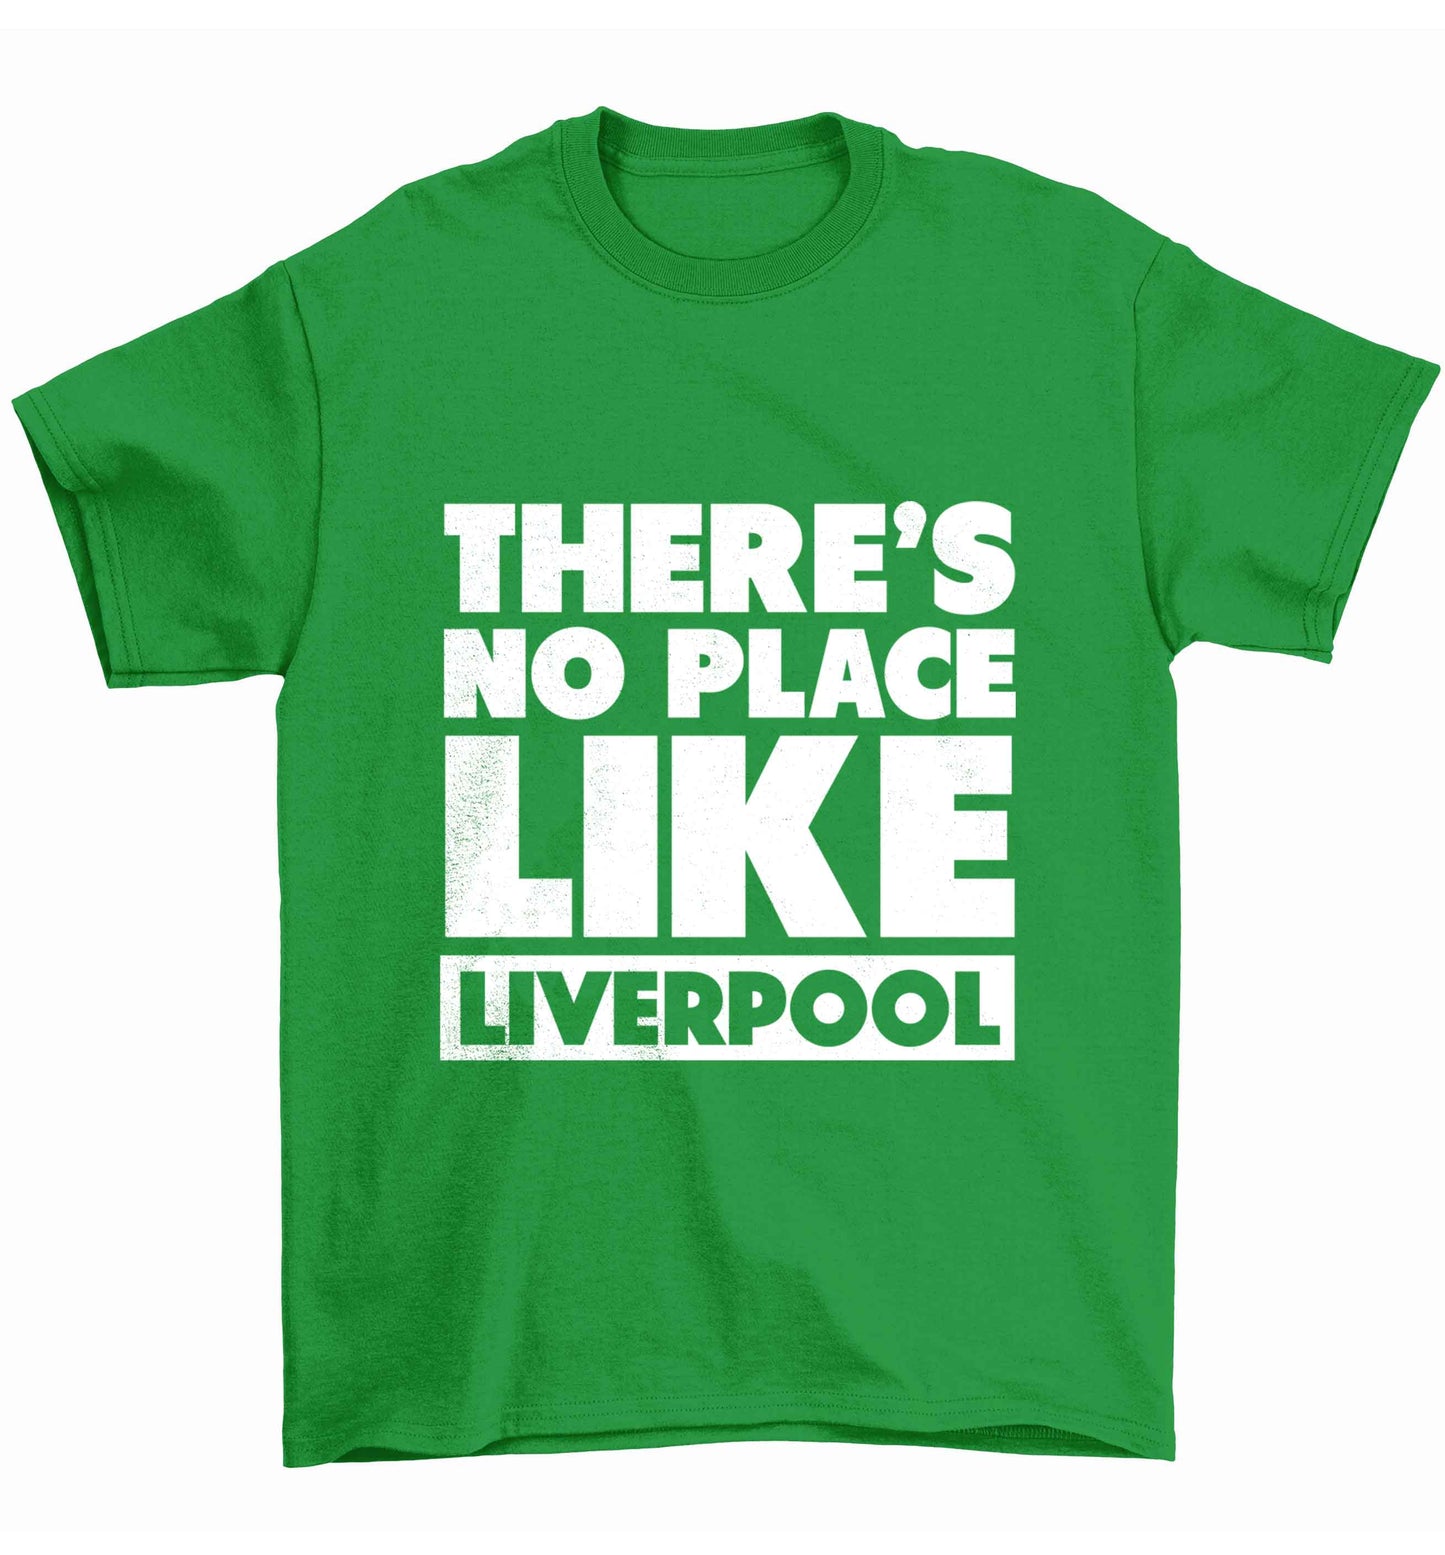 There's no place like Liverpool Children's green Tshirt 12-13 Years